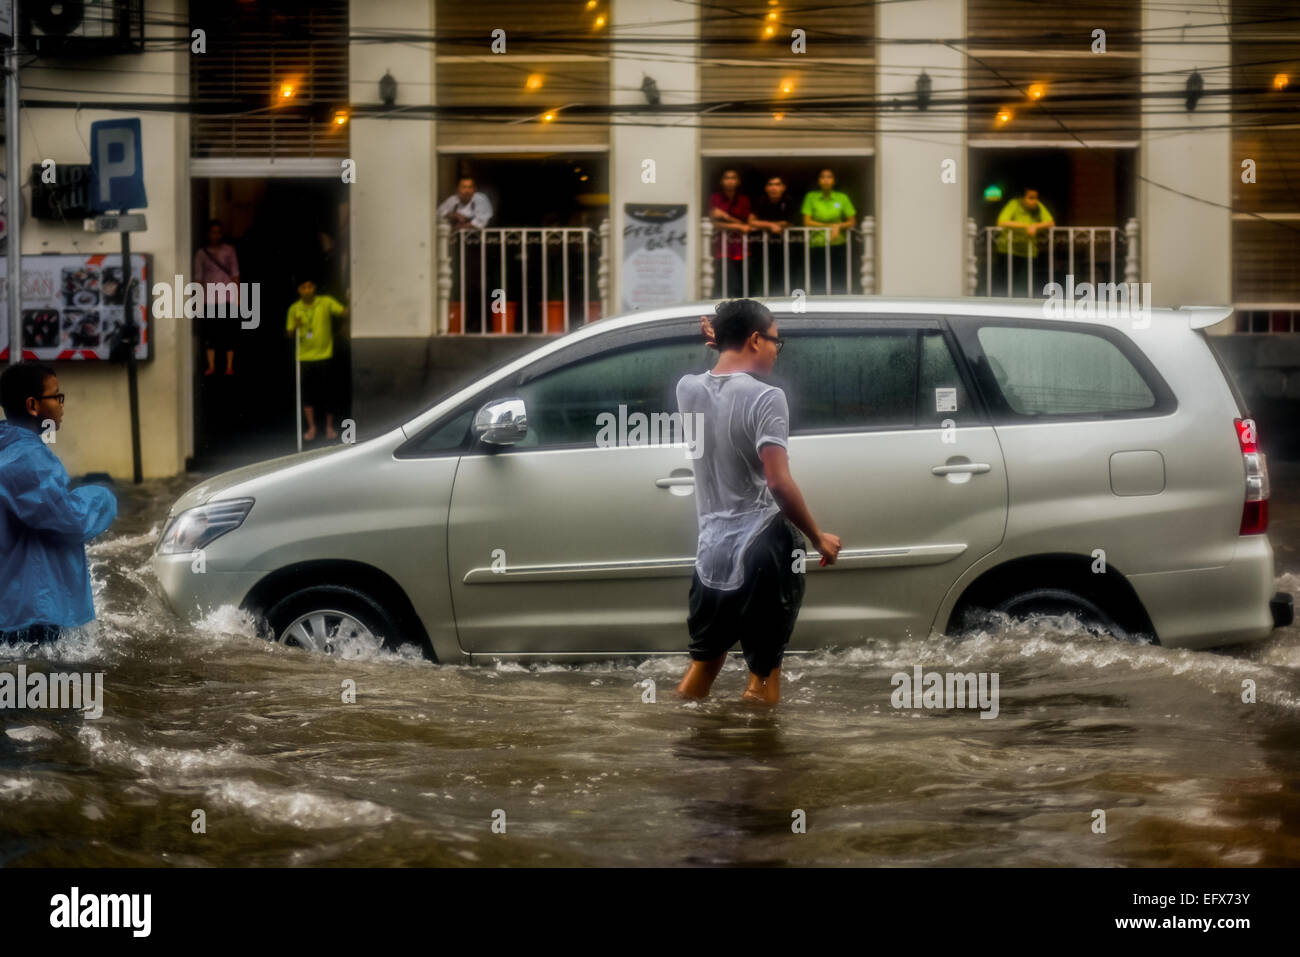 A car passing through floodwaters in Jakarta, after a continuous rain left the downtown part of the Indonesian capital city flooded. Stock Photo